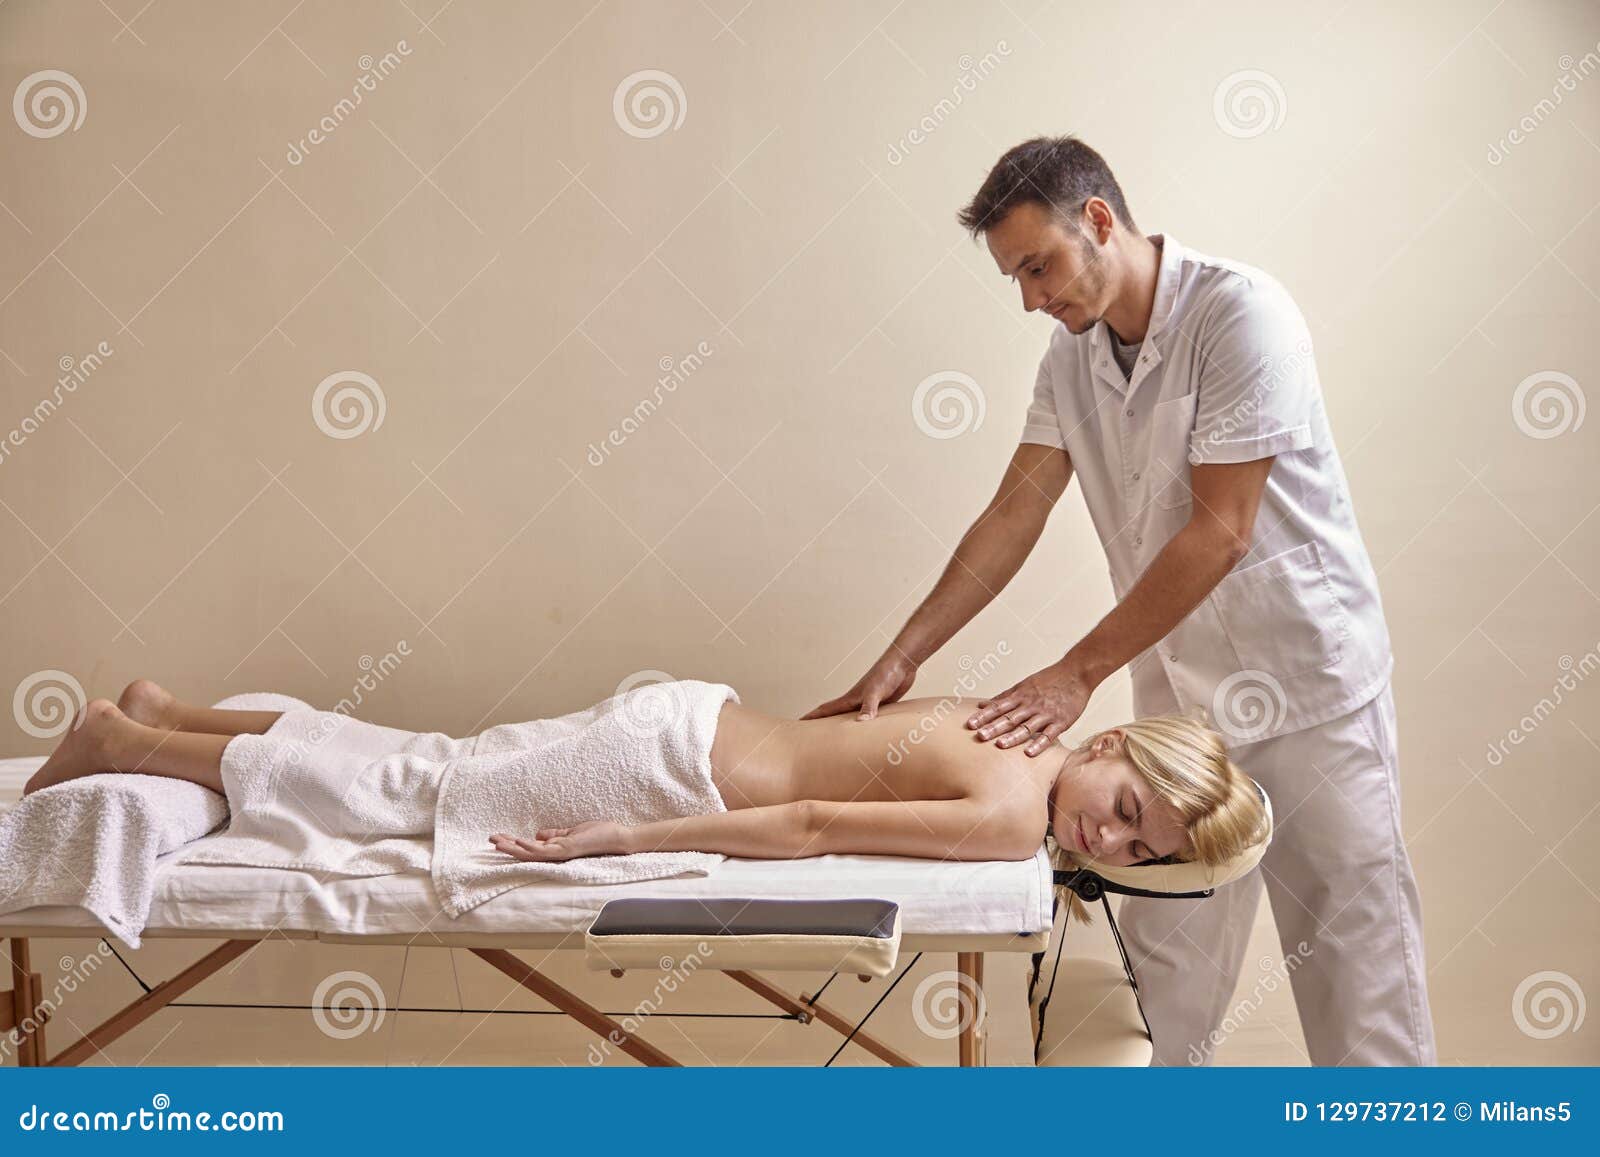 physiotherapist massage, woman back laying on bed. full lenght shot.